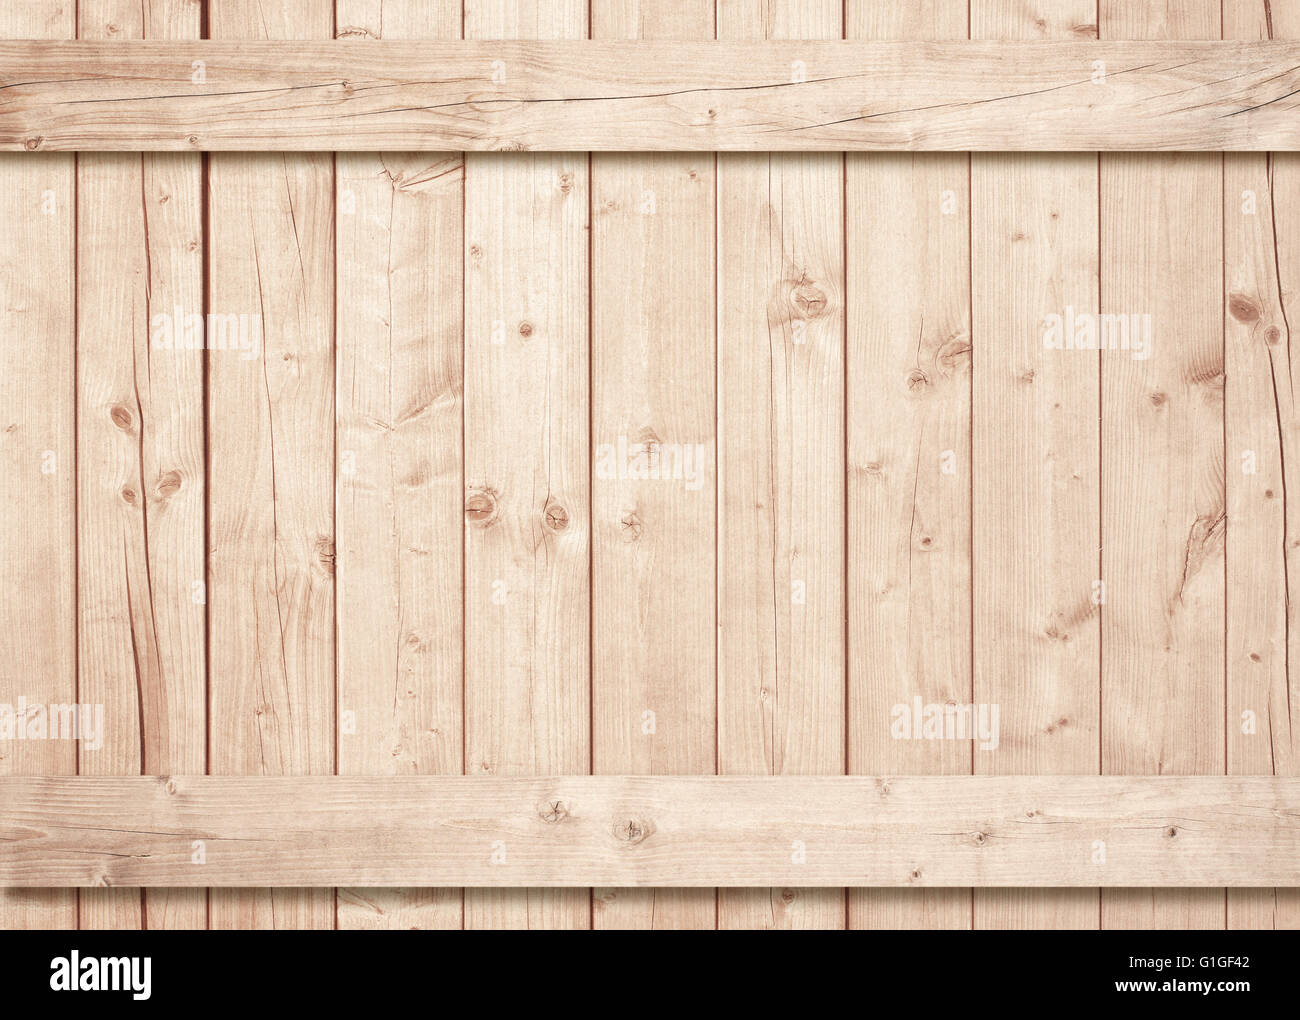 Light brown wooden wall, fence texture with horizontal and vertical planks Stock Photo